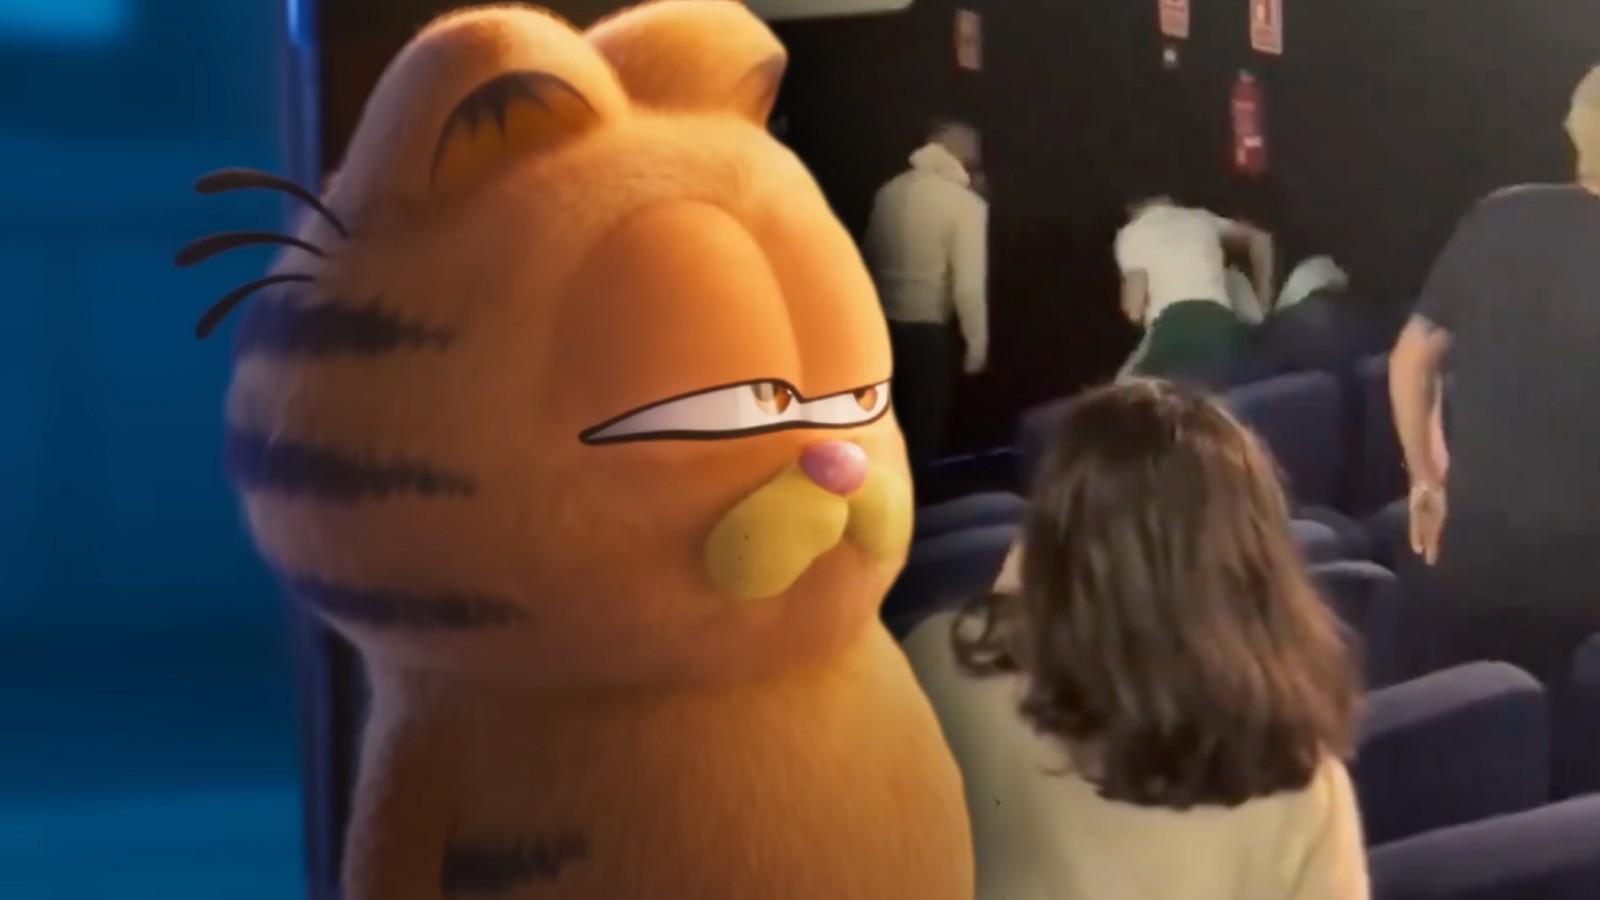 Still from the Garfield Movie and a fight that broke out at an early screening in Spain